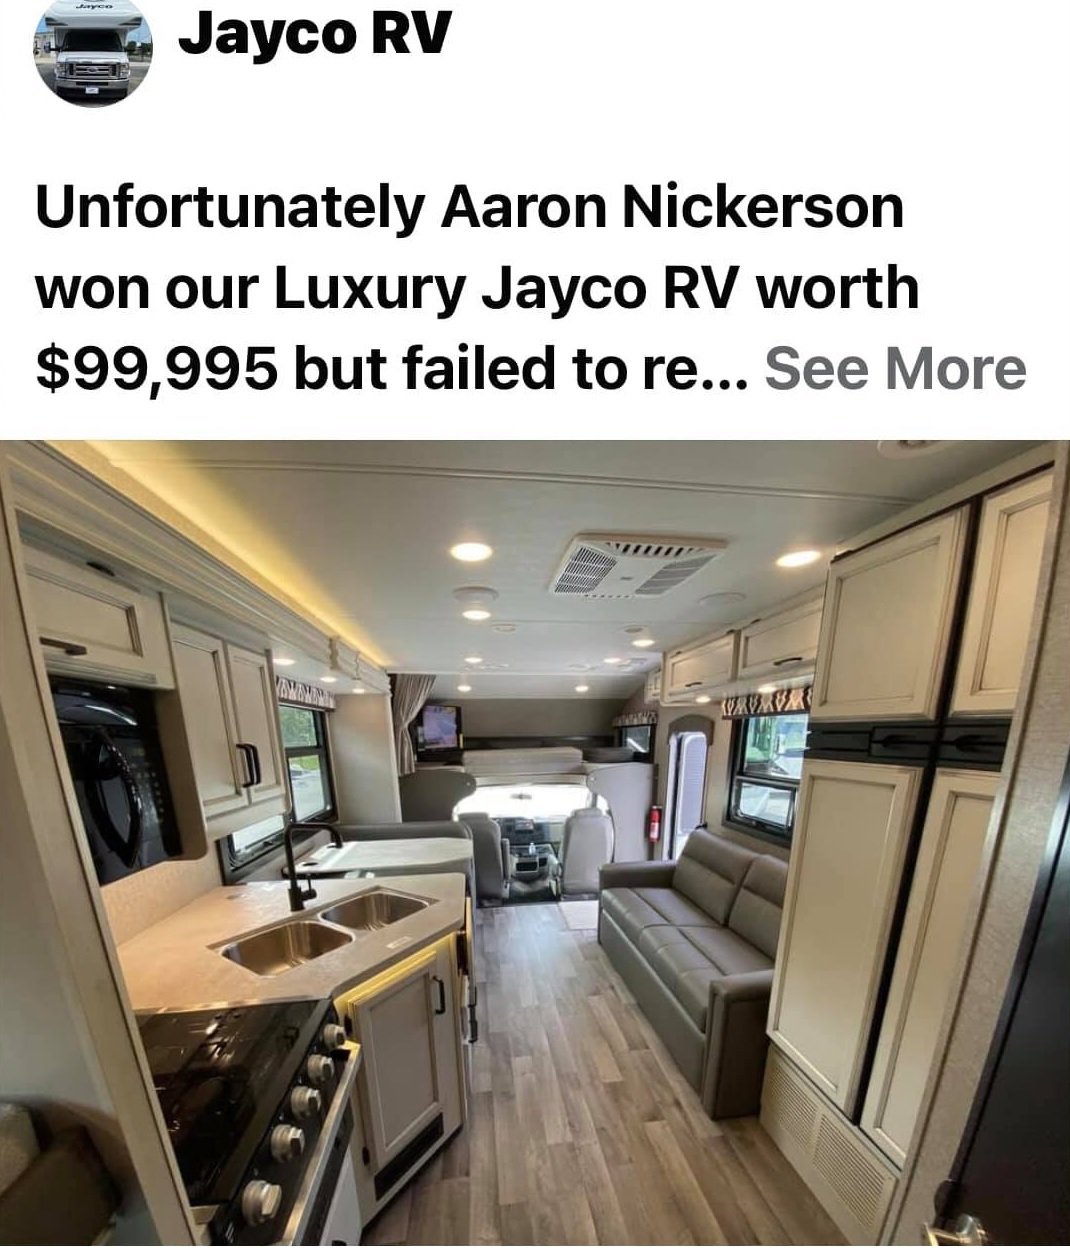 The Jayco RV Scam Giveaway worth $99,995 Inside